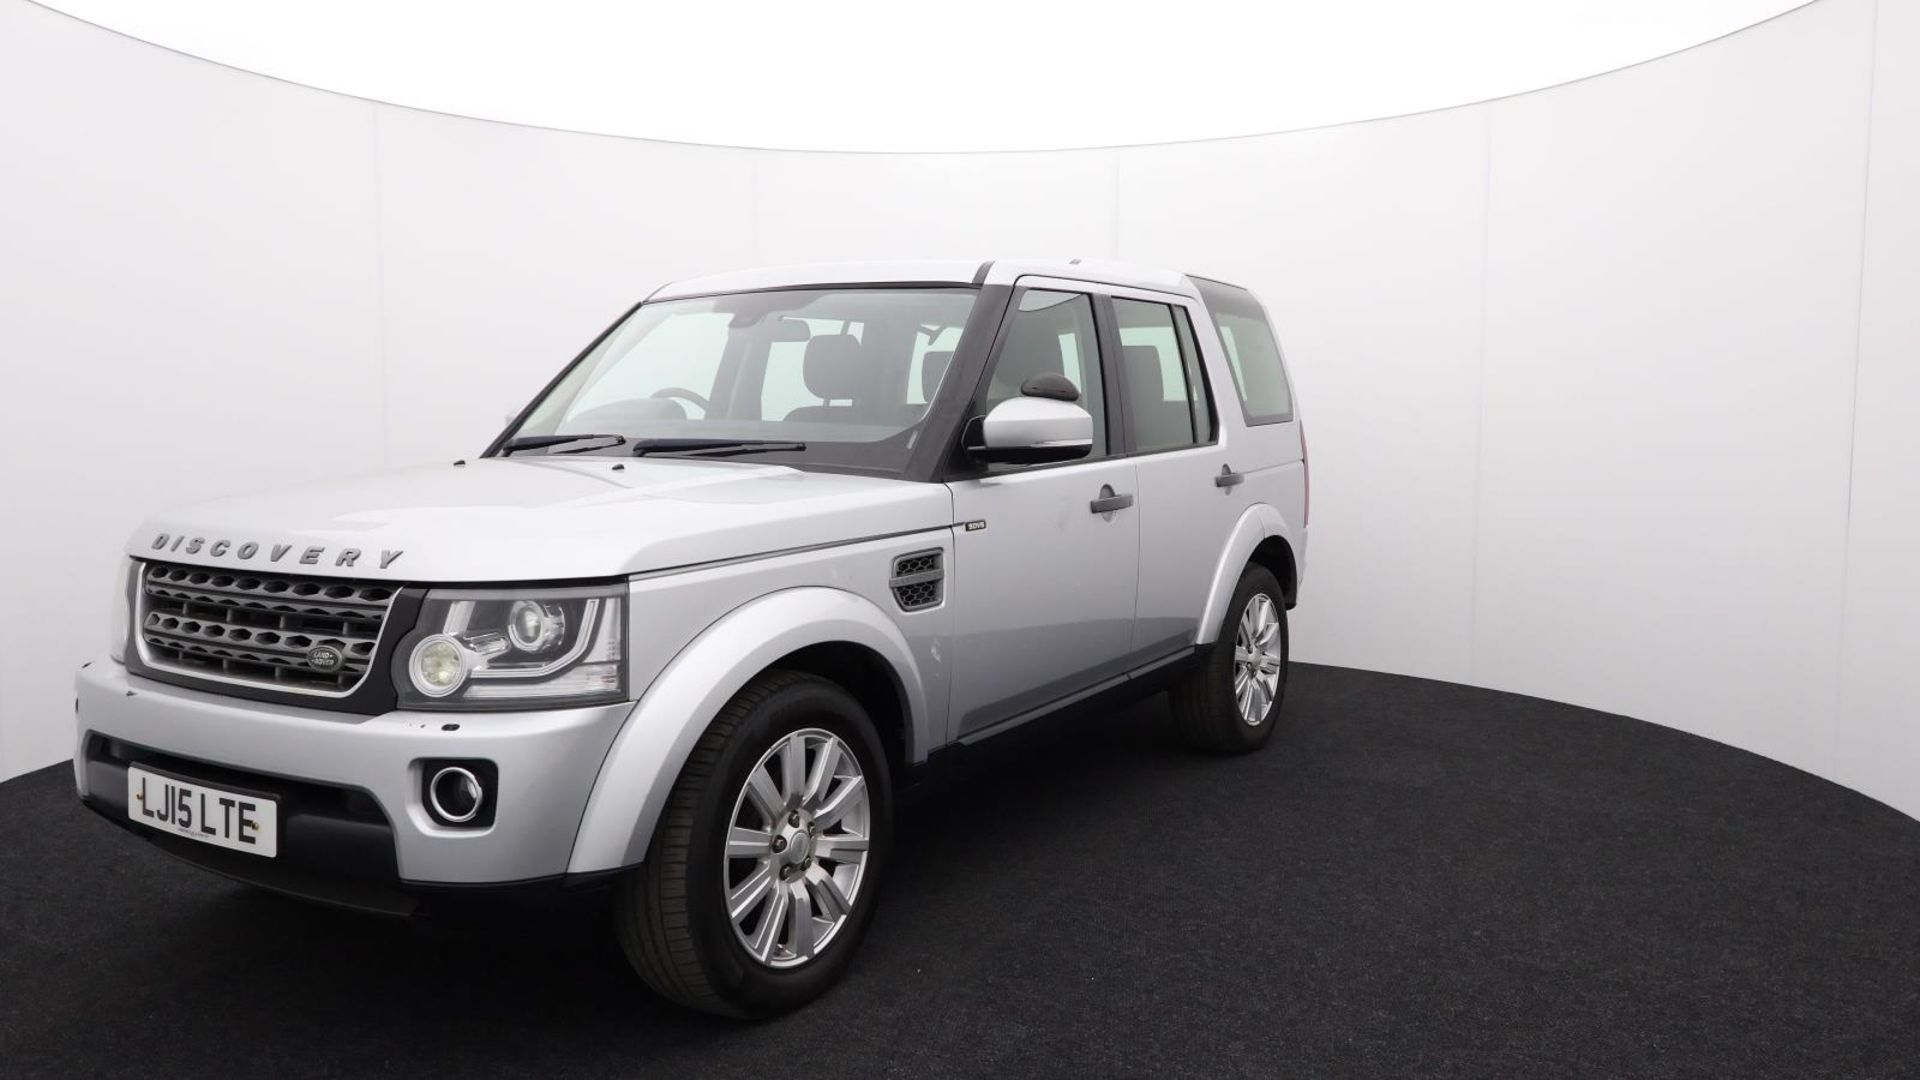 Land Rover Discovery SDV6 SE - 2015 - Automatic - Diesel - 2993cc 6 Cylinder engine - LJ15 LTE - Image 5 of 44